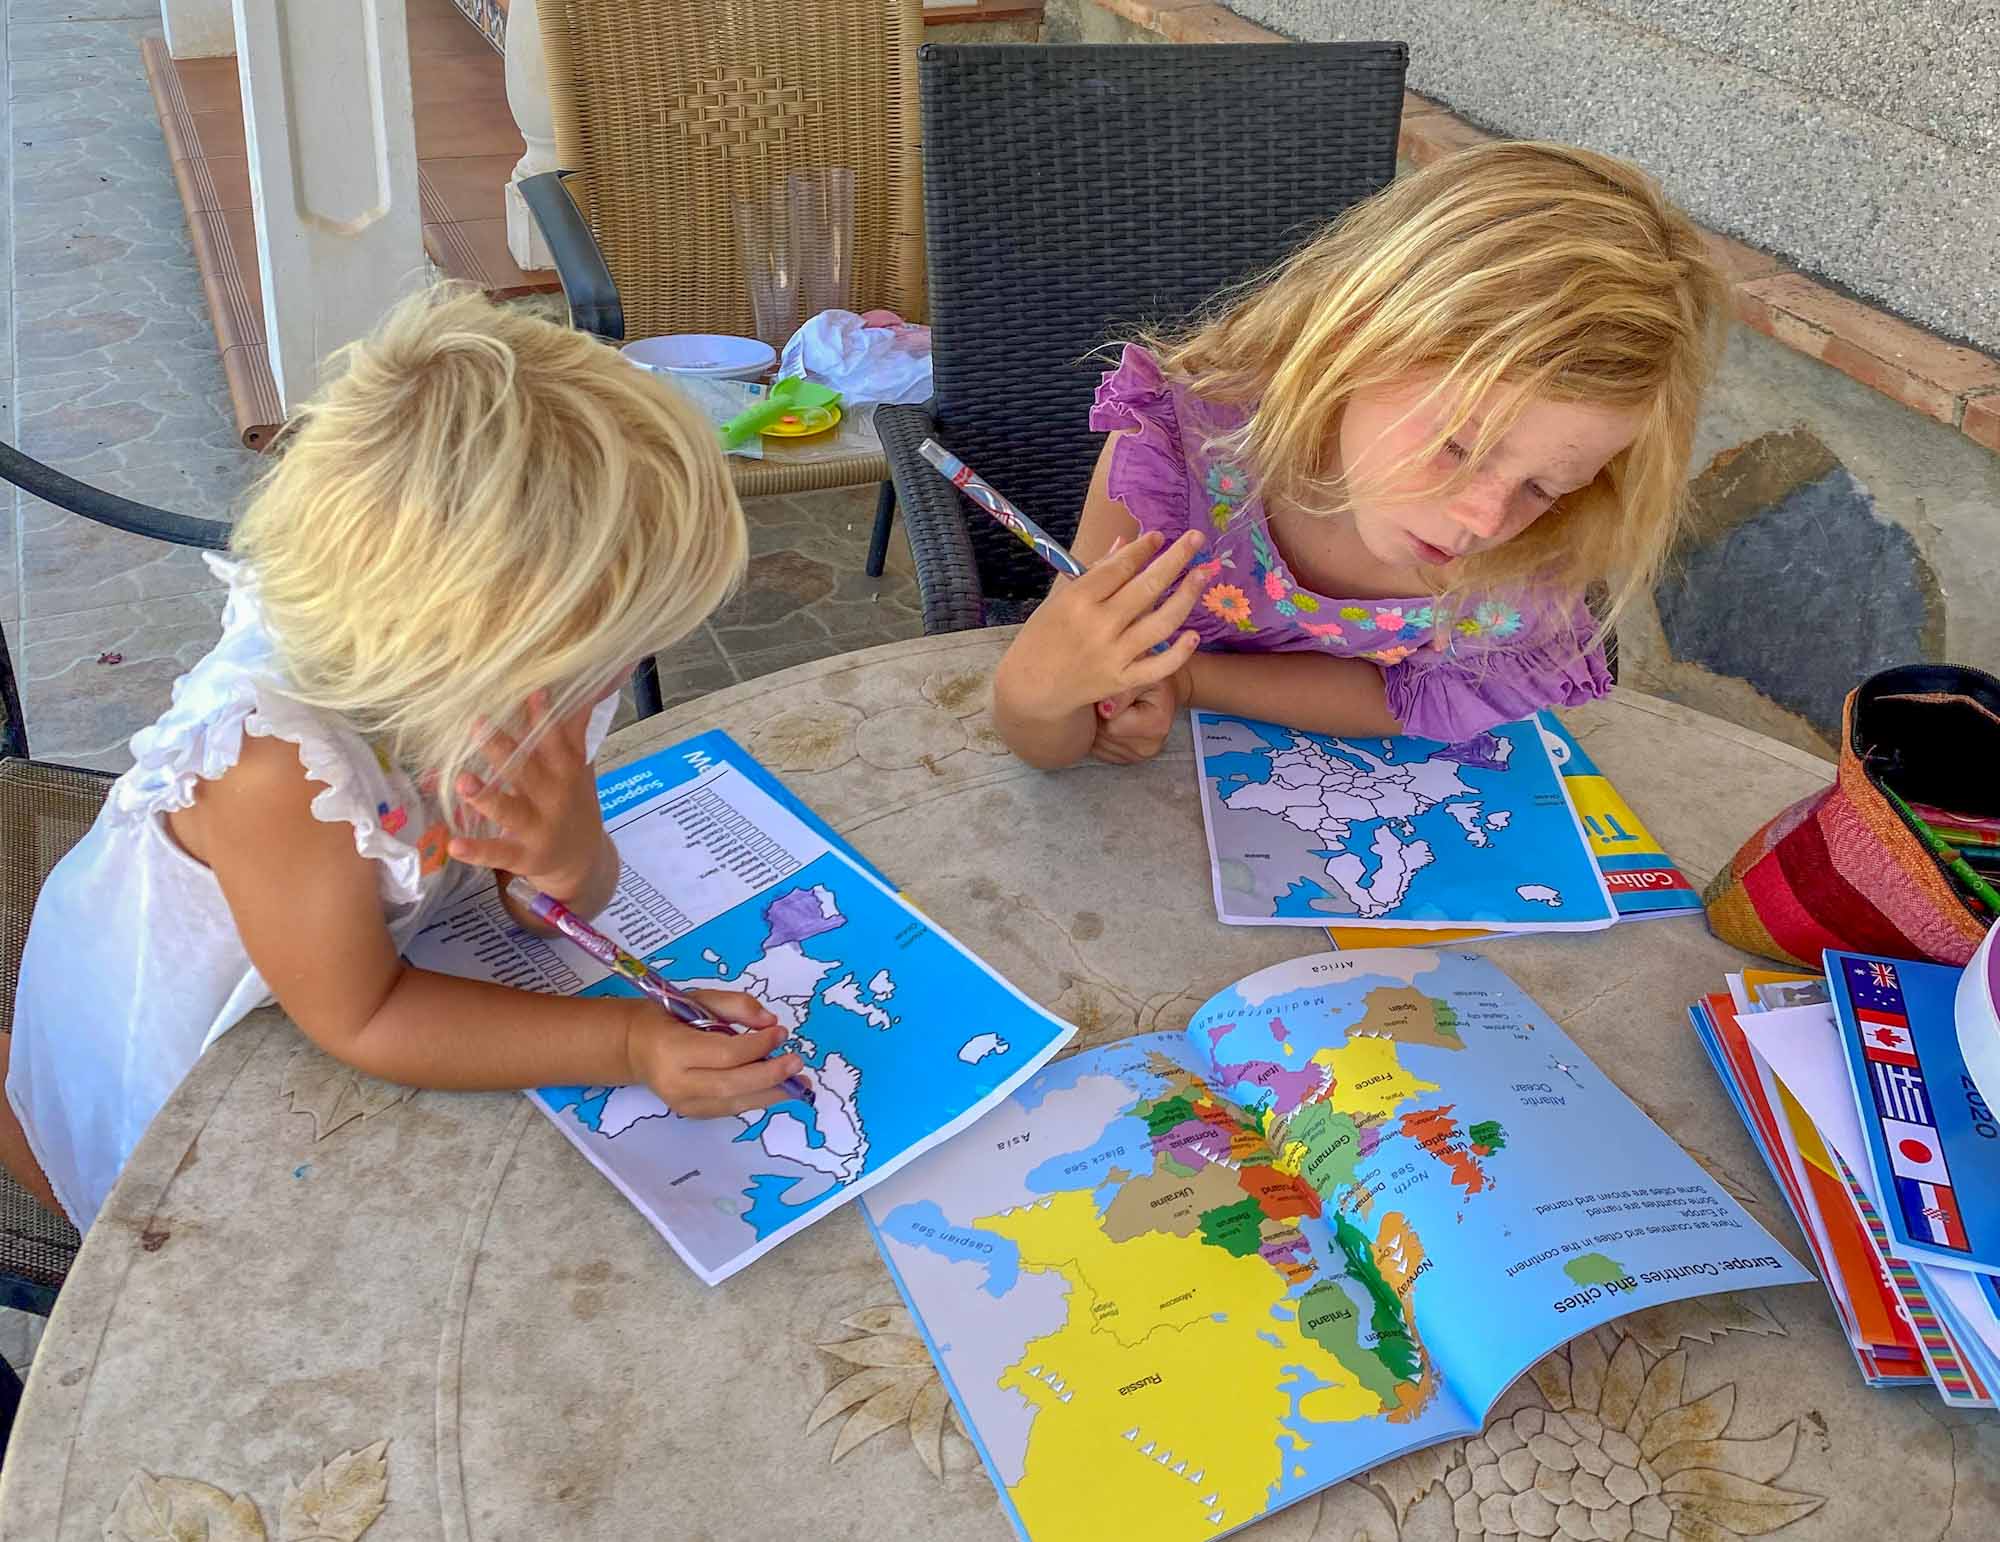 2 girls sat at a table colouring in a map of Europe, by referring to an atlas book